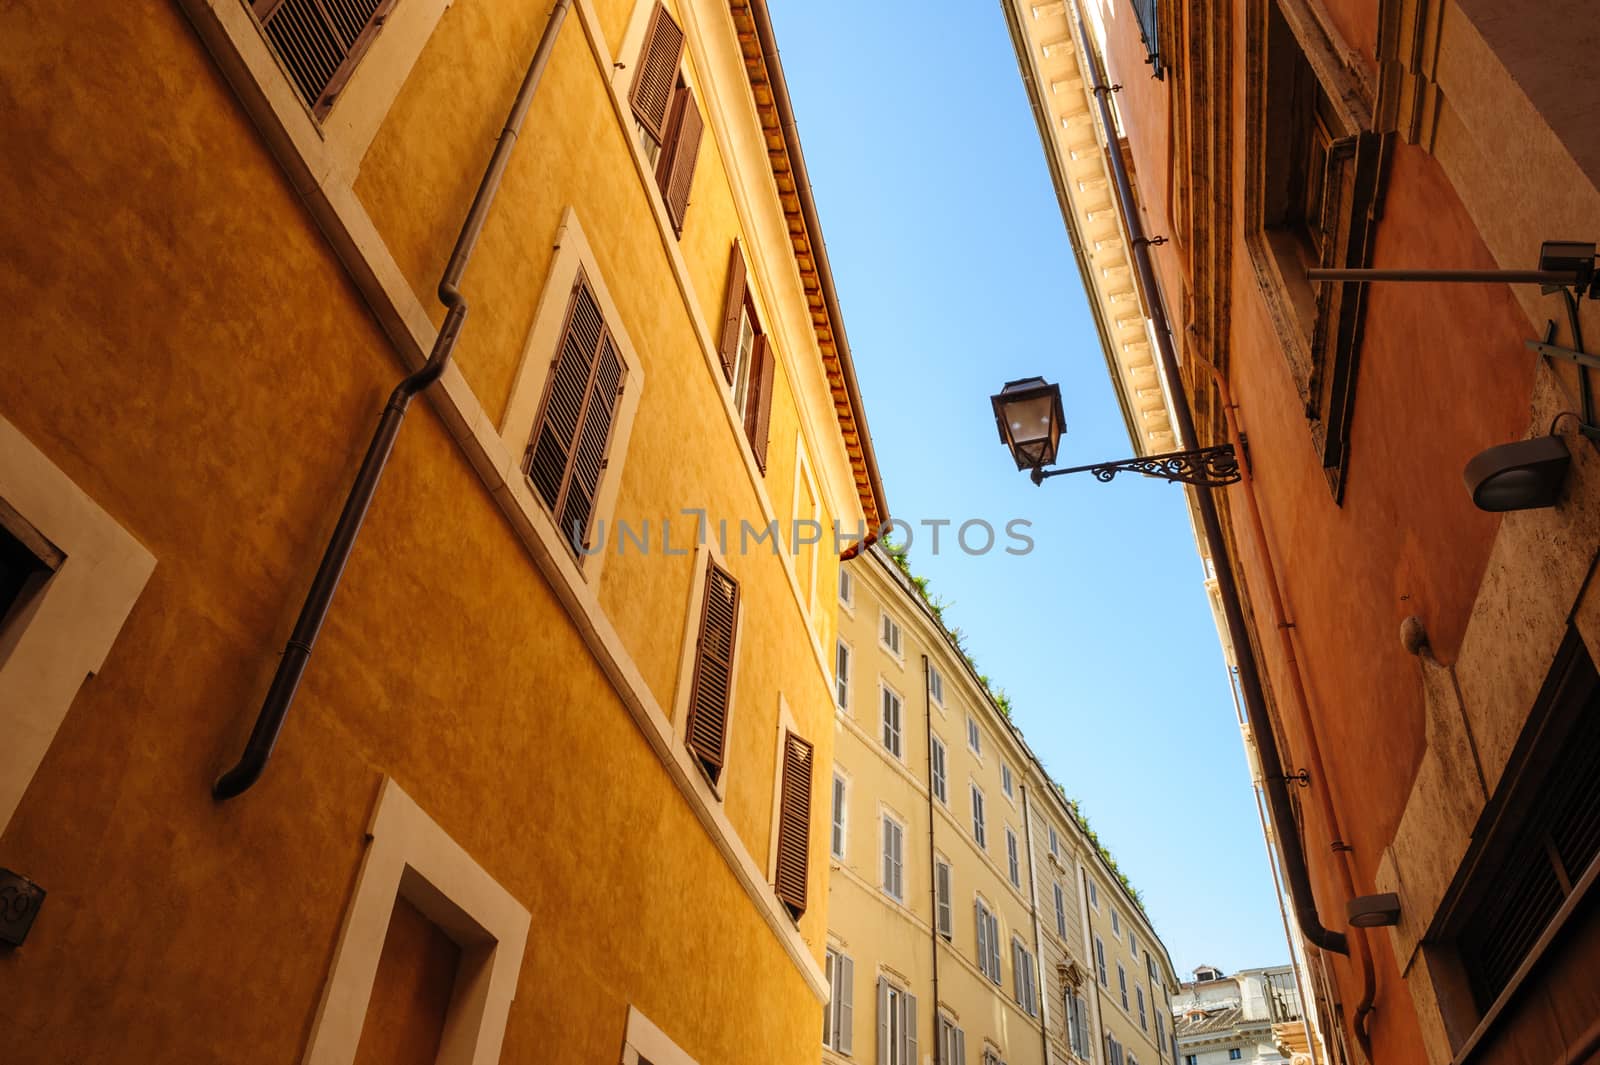 Old streets of Rome, Italy by starush